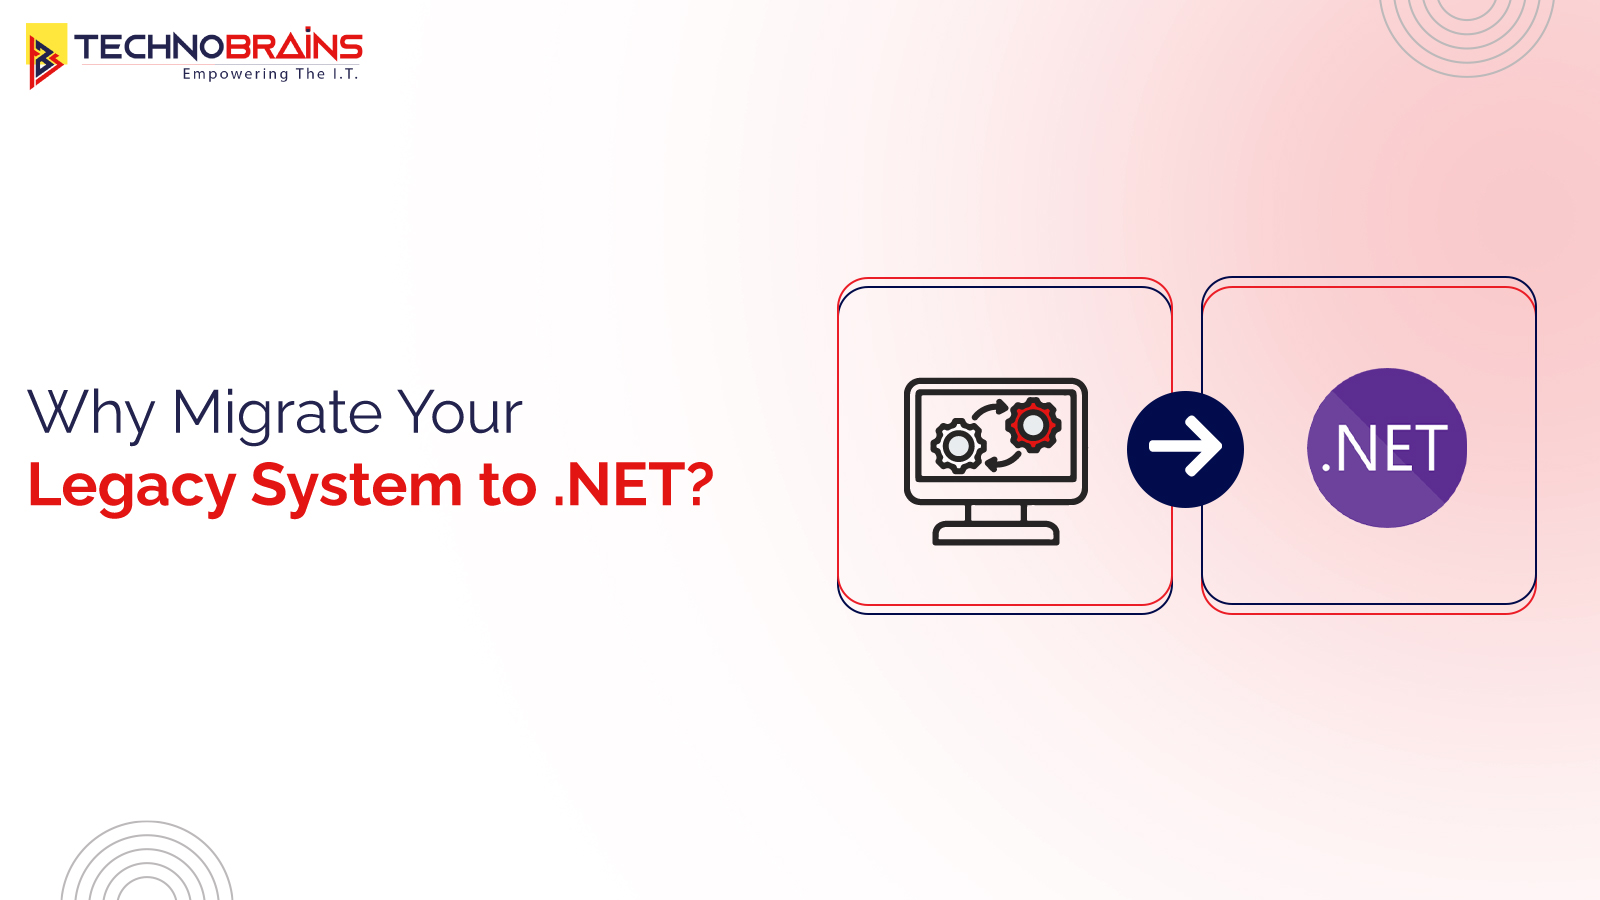 Legacy Systems to.NET